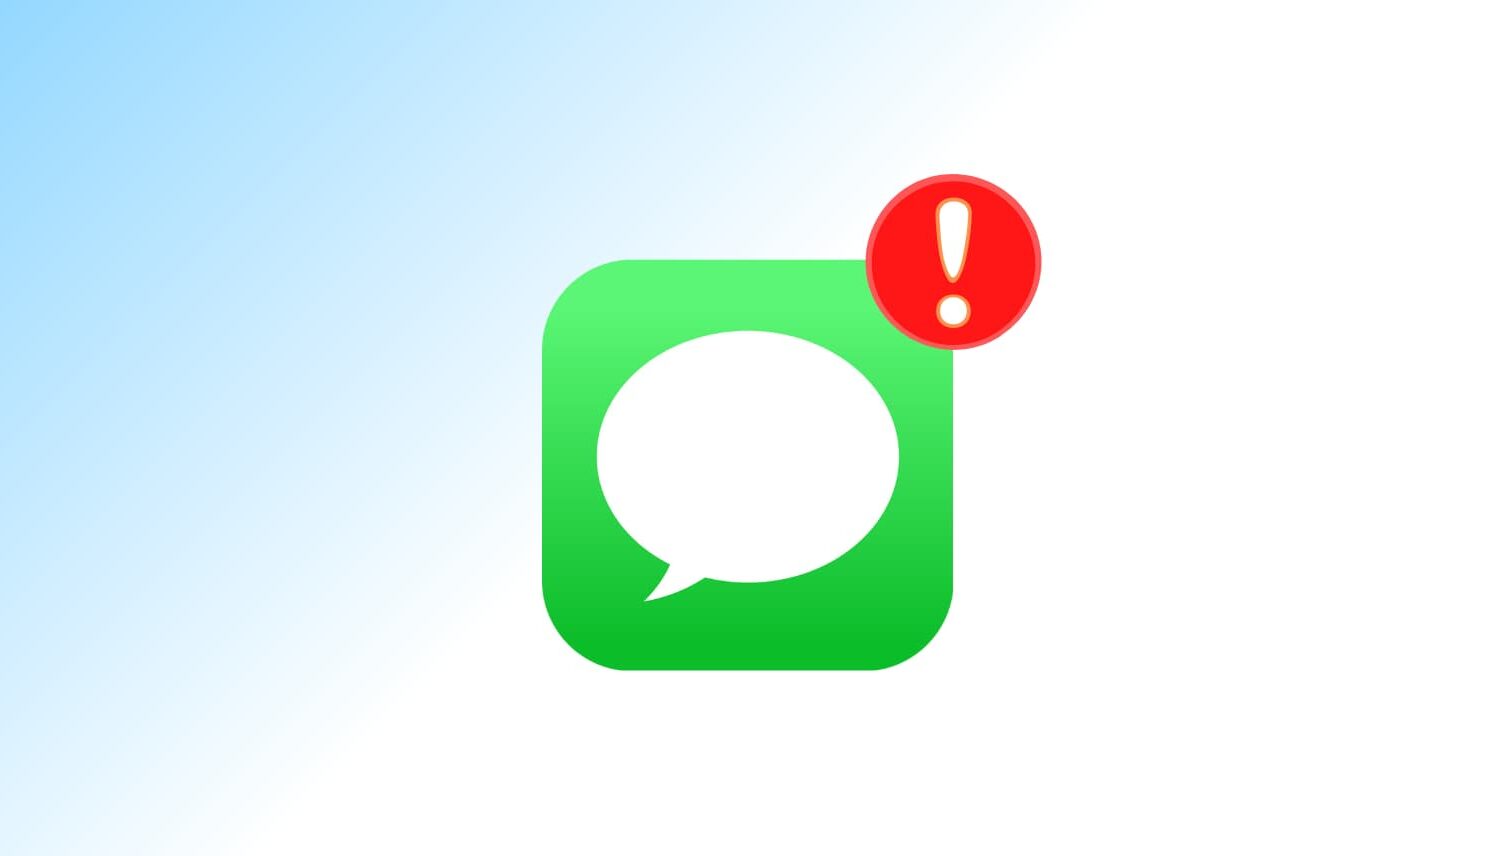 Messages app with red exclamation mark